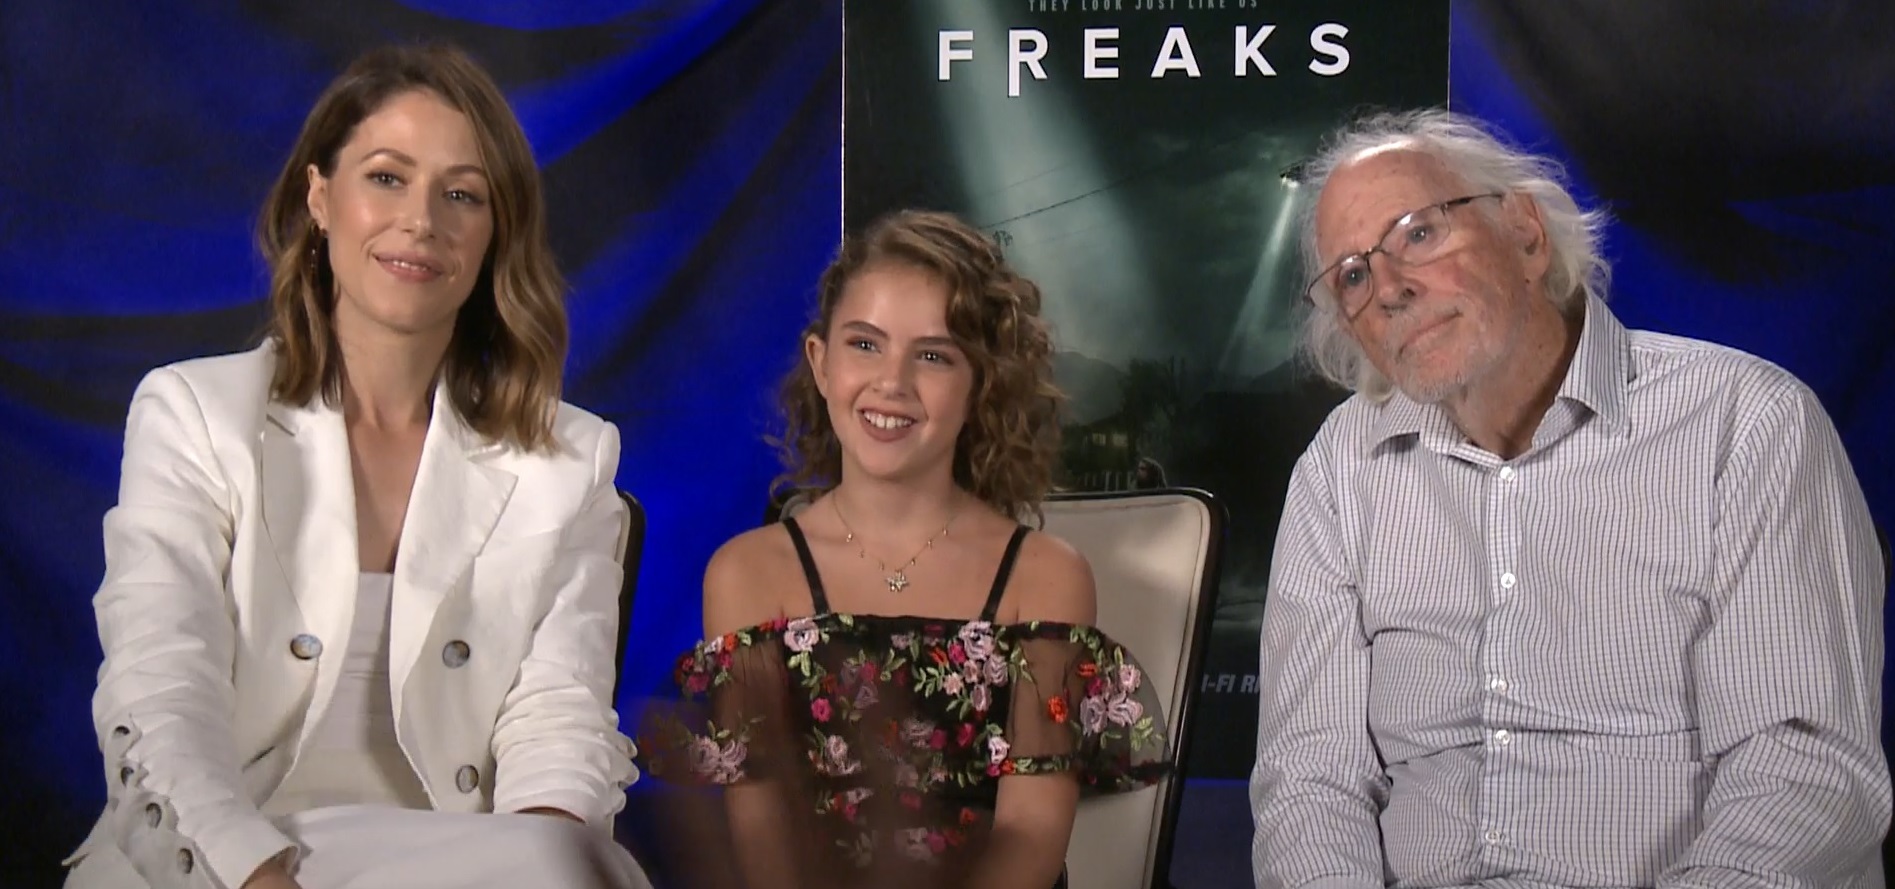 Freaks: Amanda Crew, Lexy Kolker and Bruce Dern on Family Dynamics with Superpowers